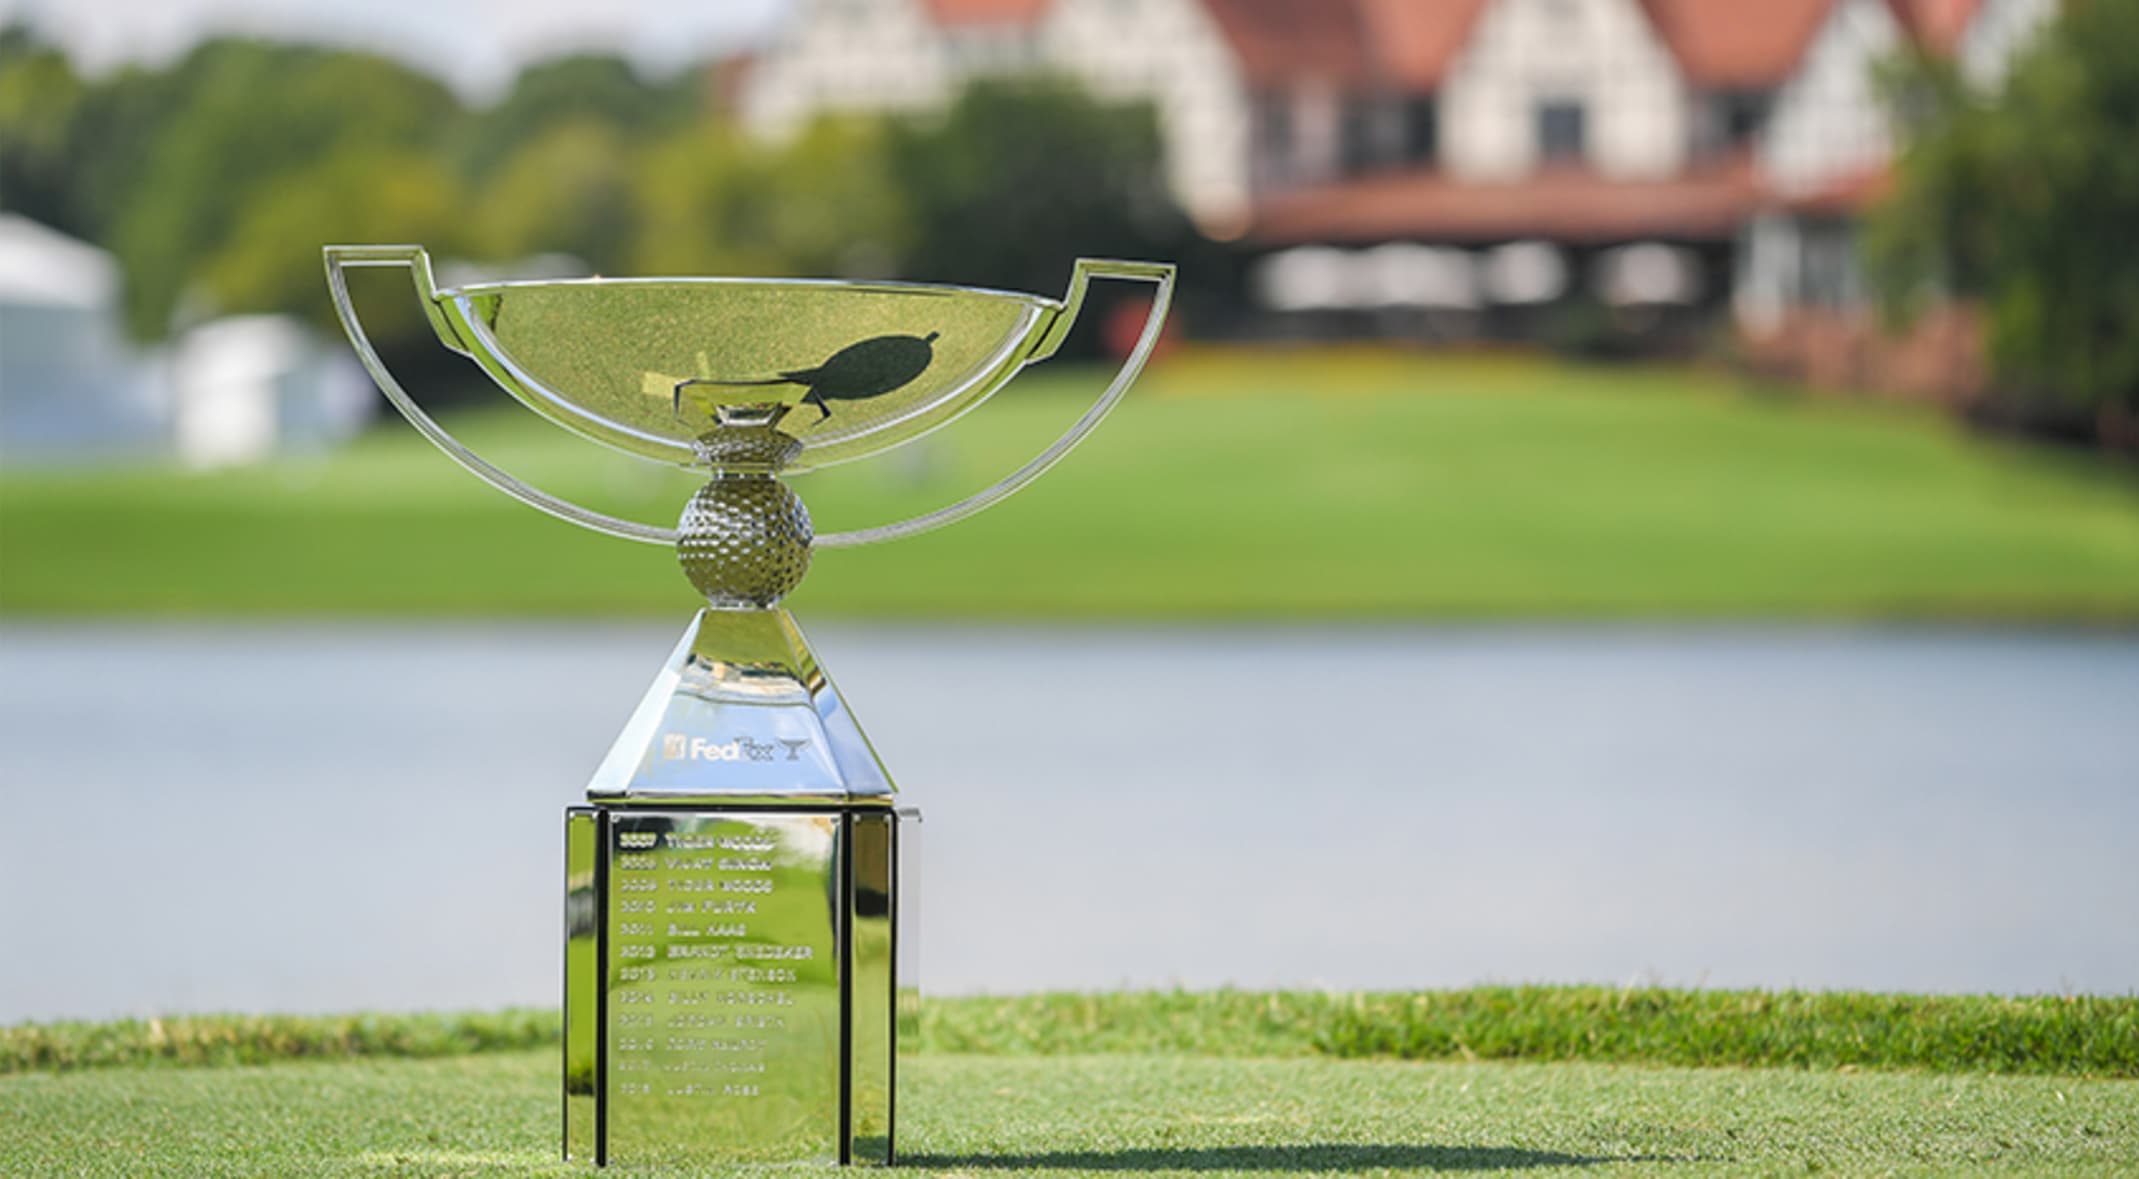 fedex cup round 4 tee times